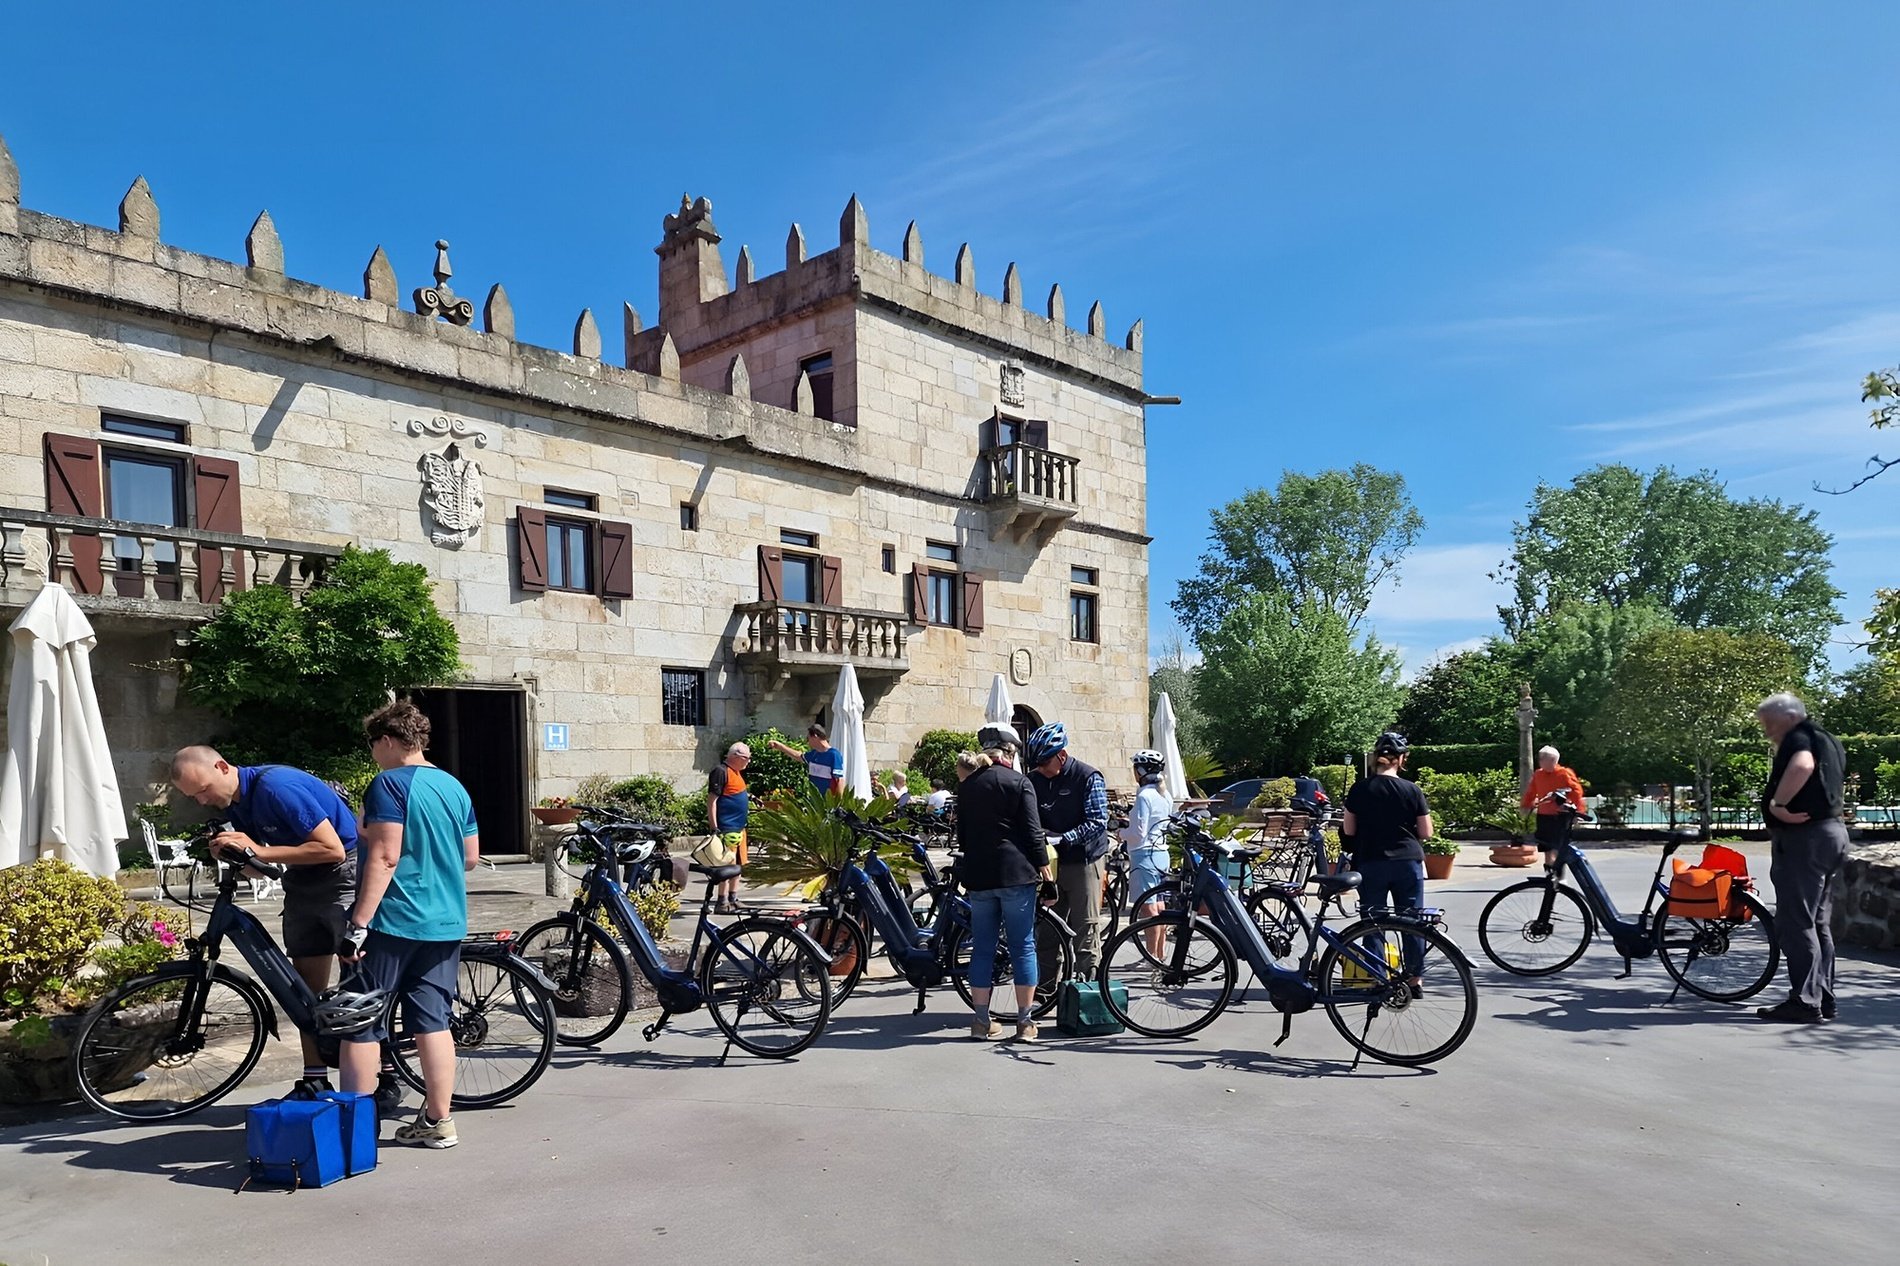 a group of people riding bicycles in front of a castle